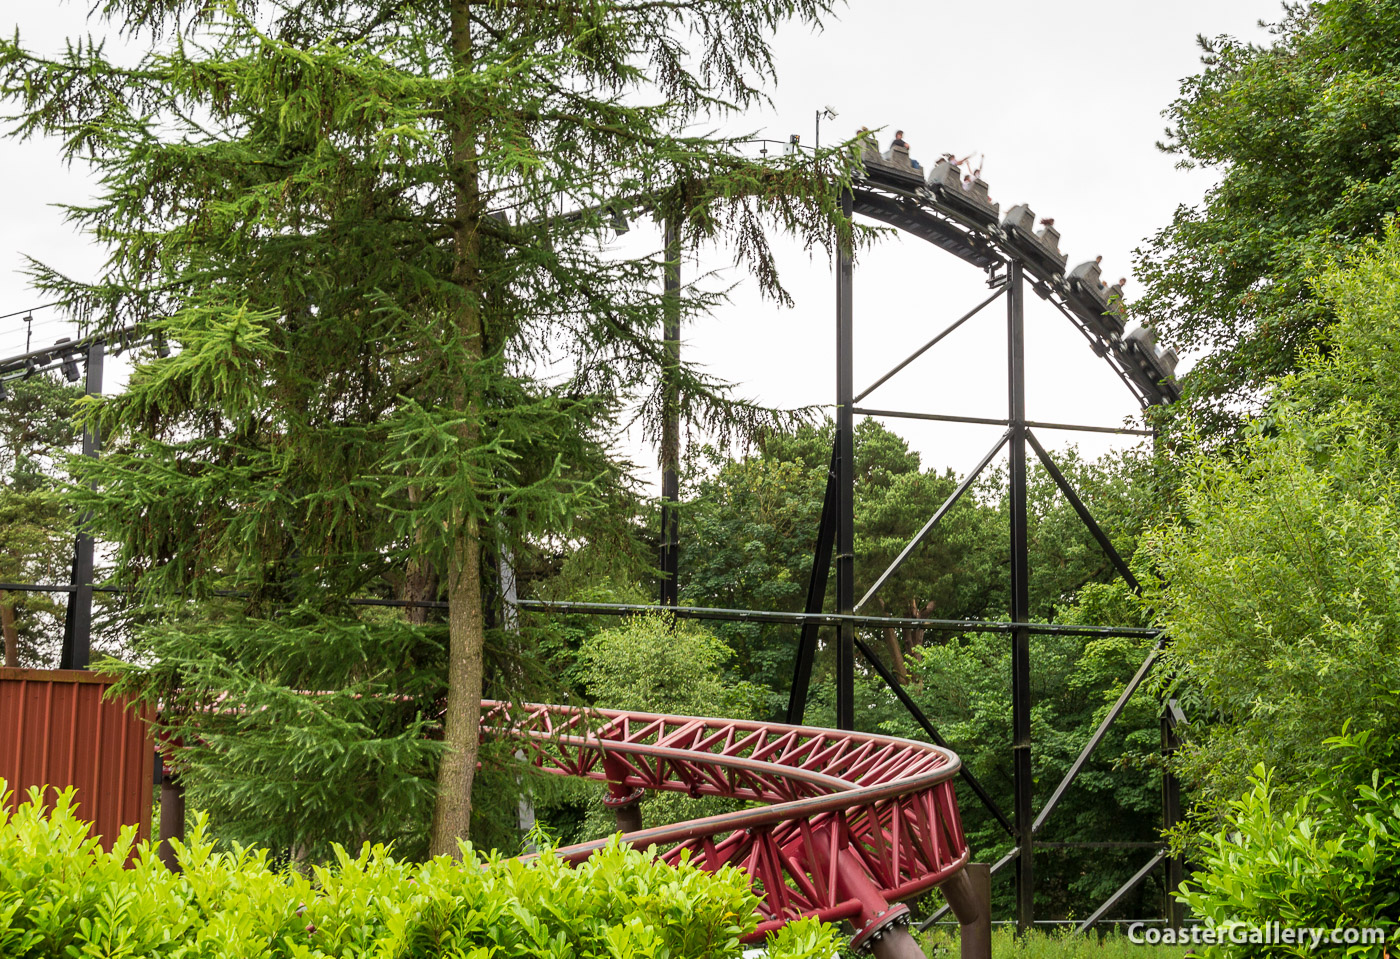 Lift hills on the scarry Thirteen roller coaster at Alton Towers